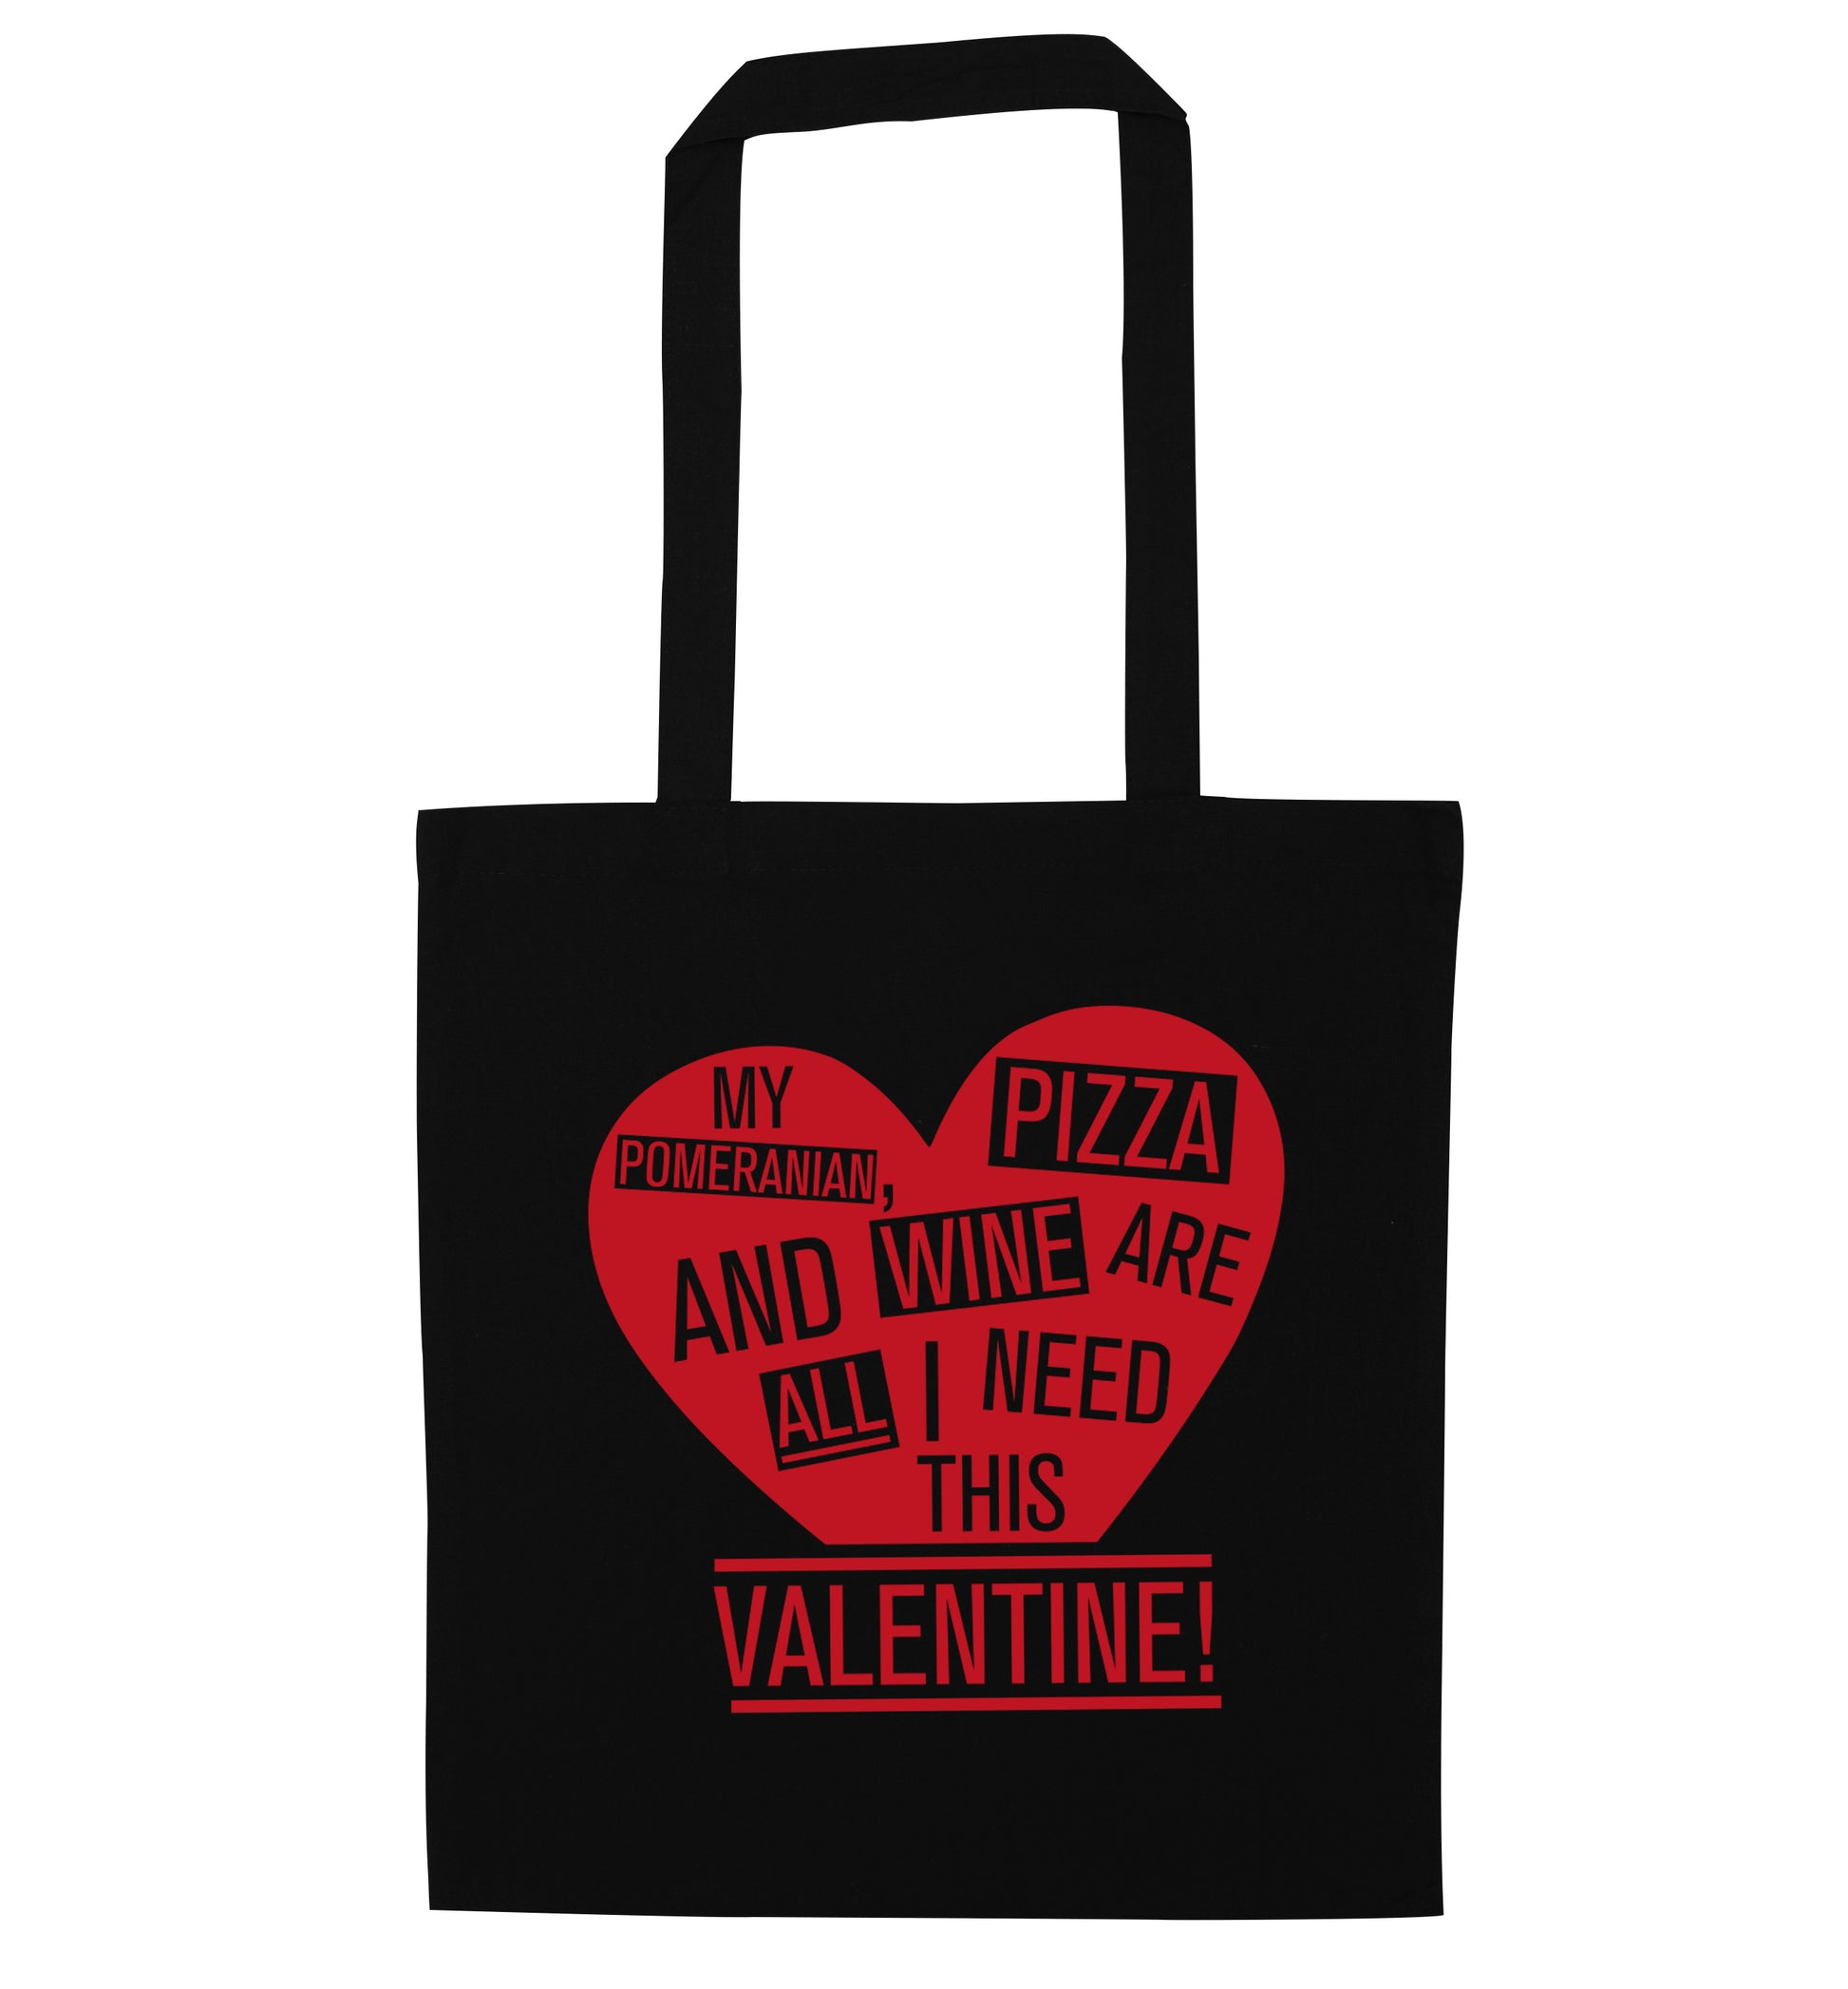 My pomeranian, chocolate and wine are all I need this valentine! black tote bag